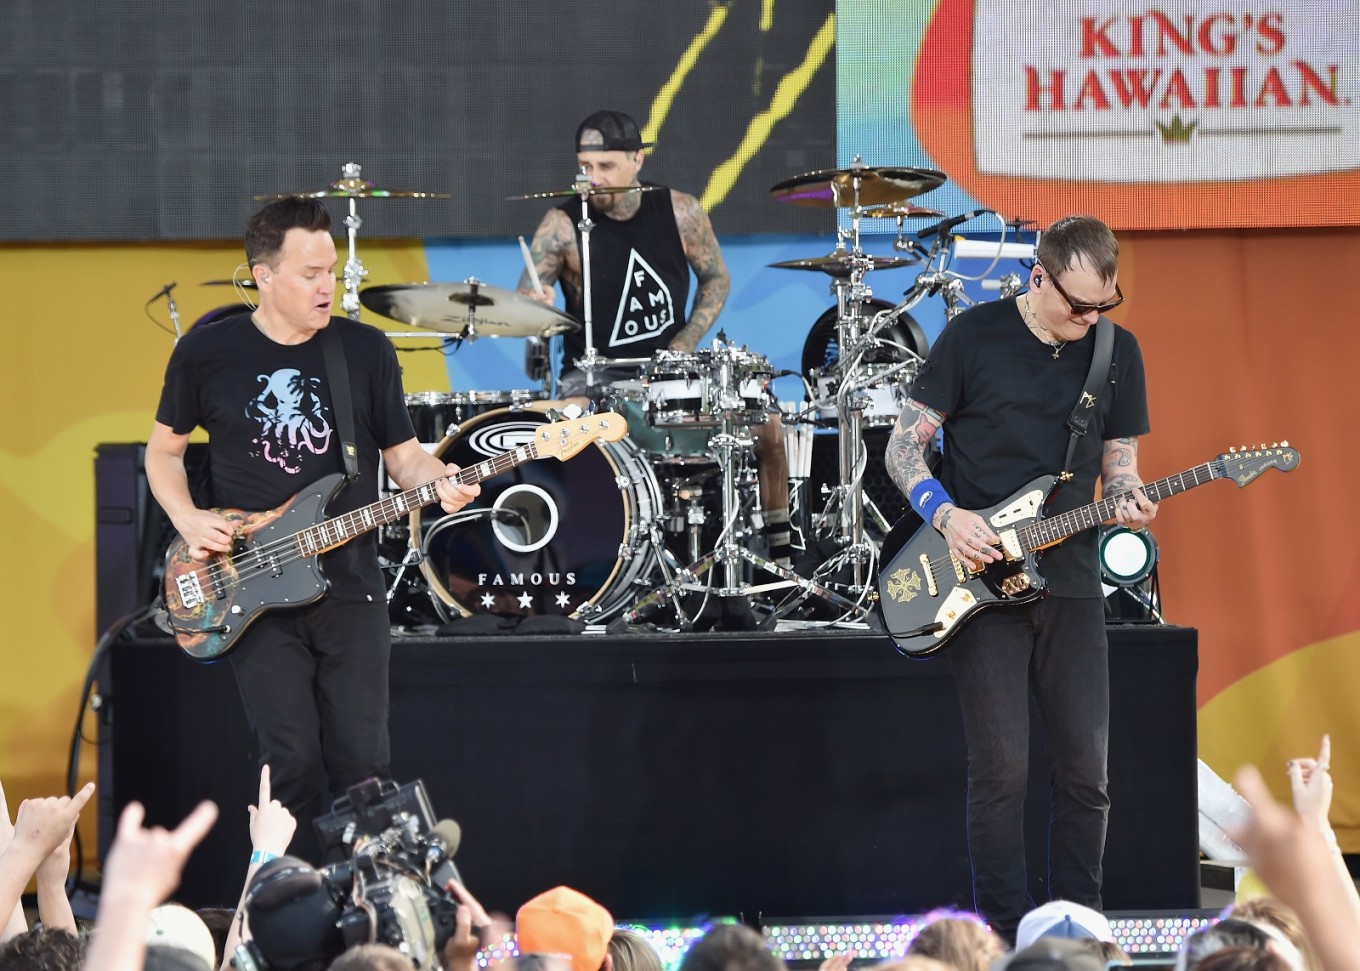 Blink-182 calls off shows after Linkin Park suicide - Entertainment - The Jakarta Post1360 x 971